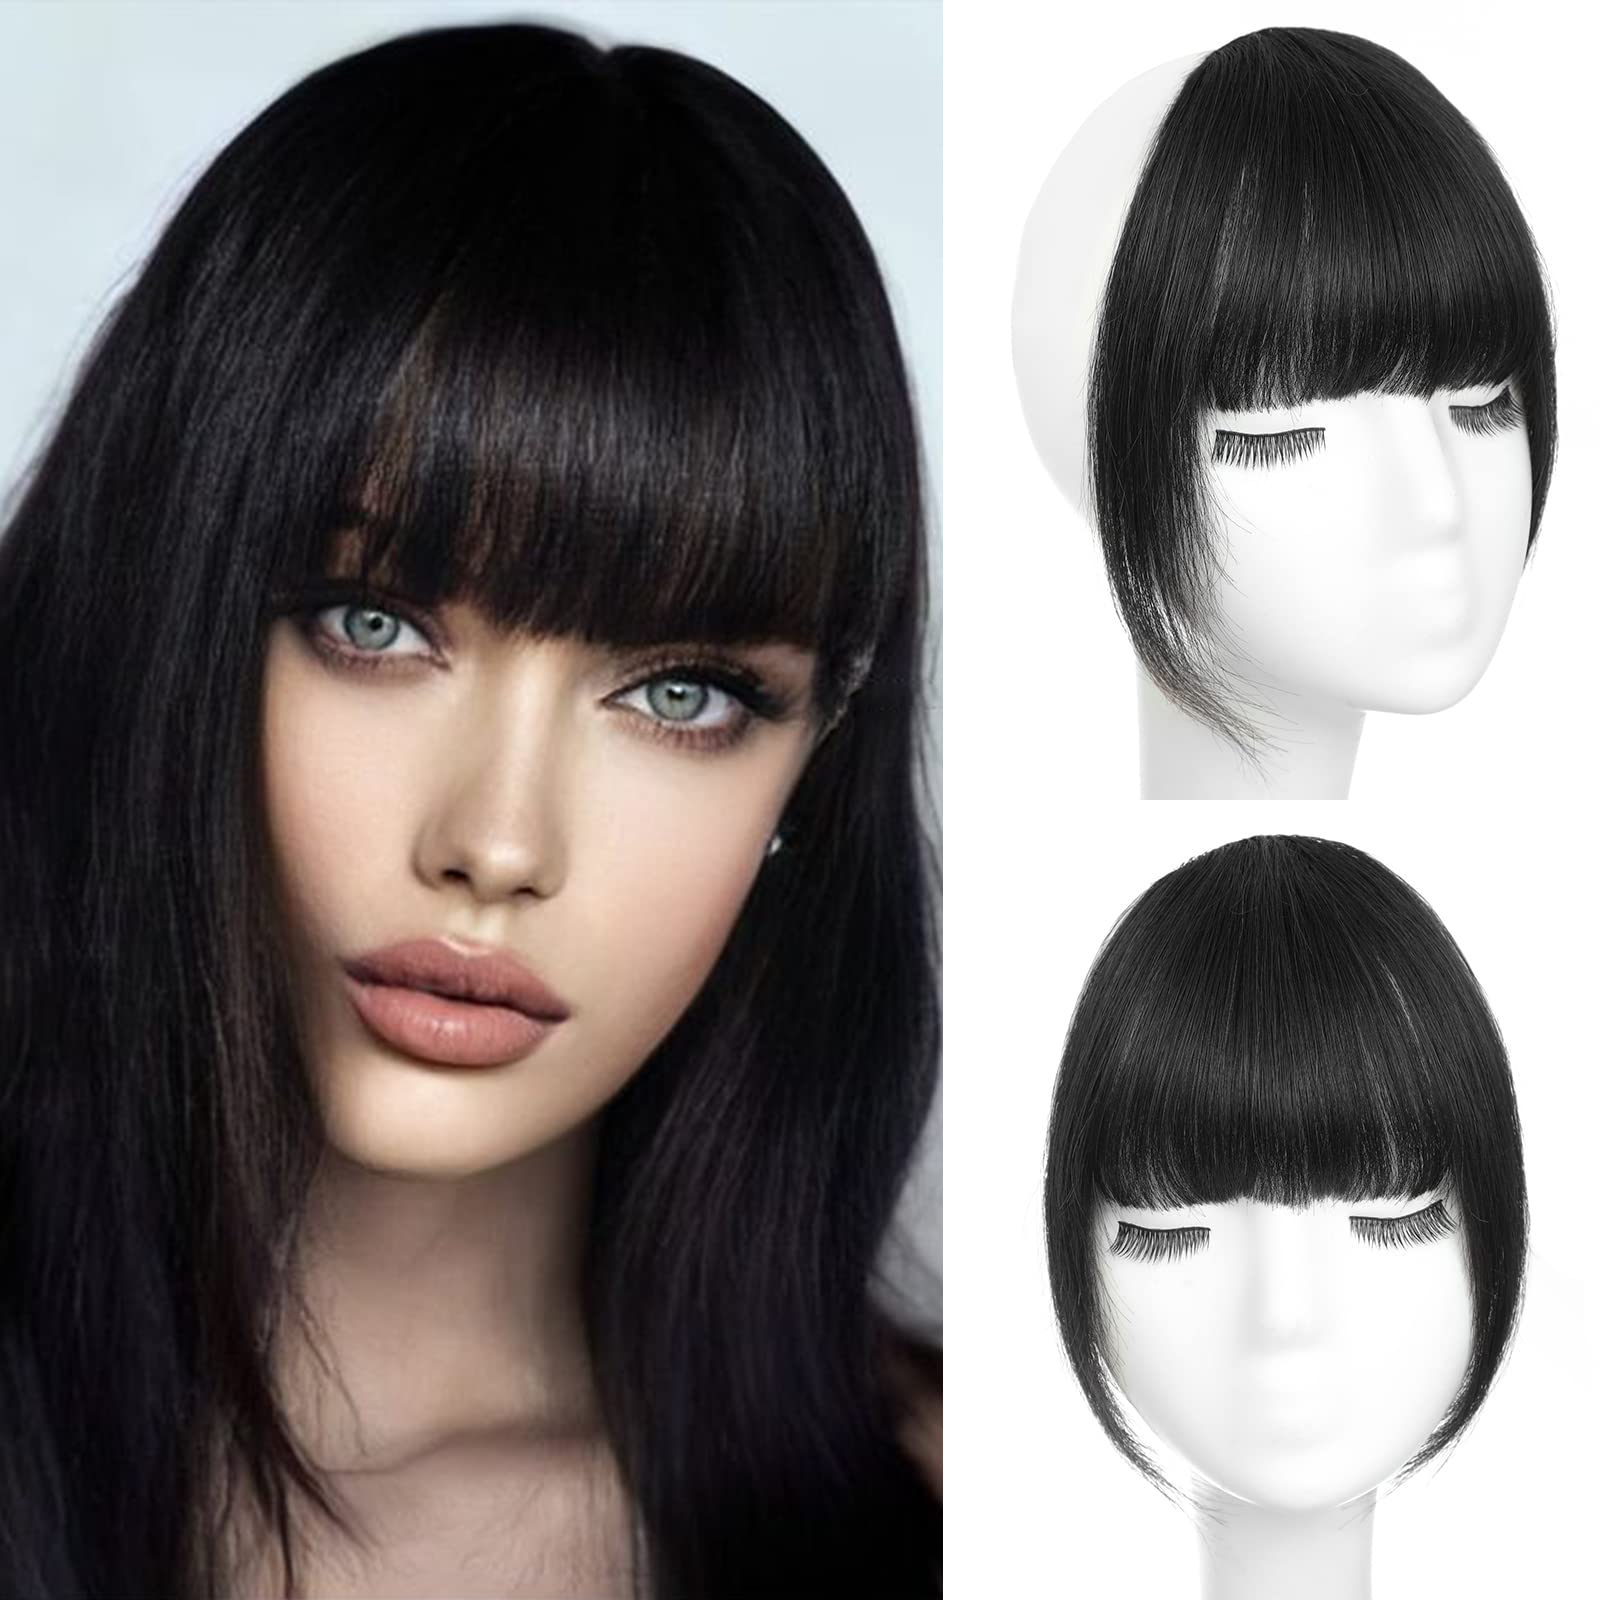 WECAN Clip in Bangs 100% Human Hair Extensions Bangs Hair Clip Natural Black  Fringe with